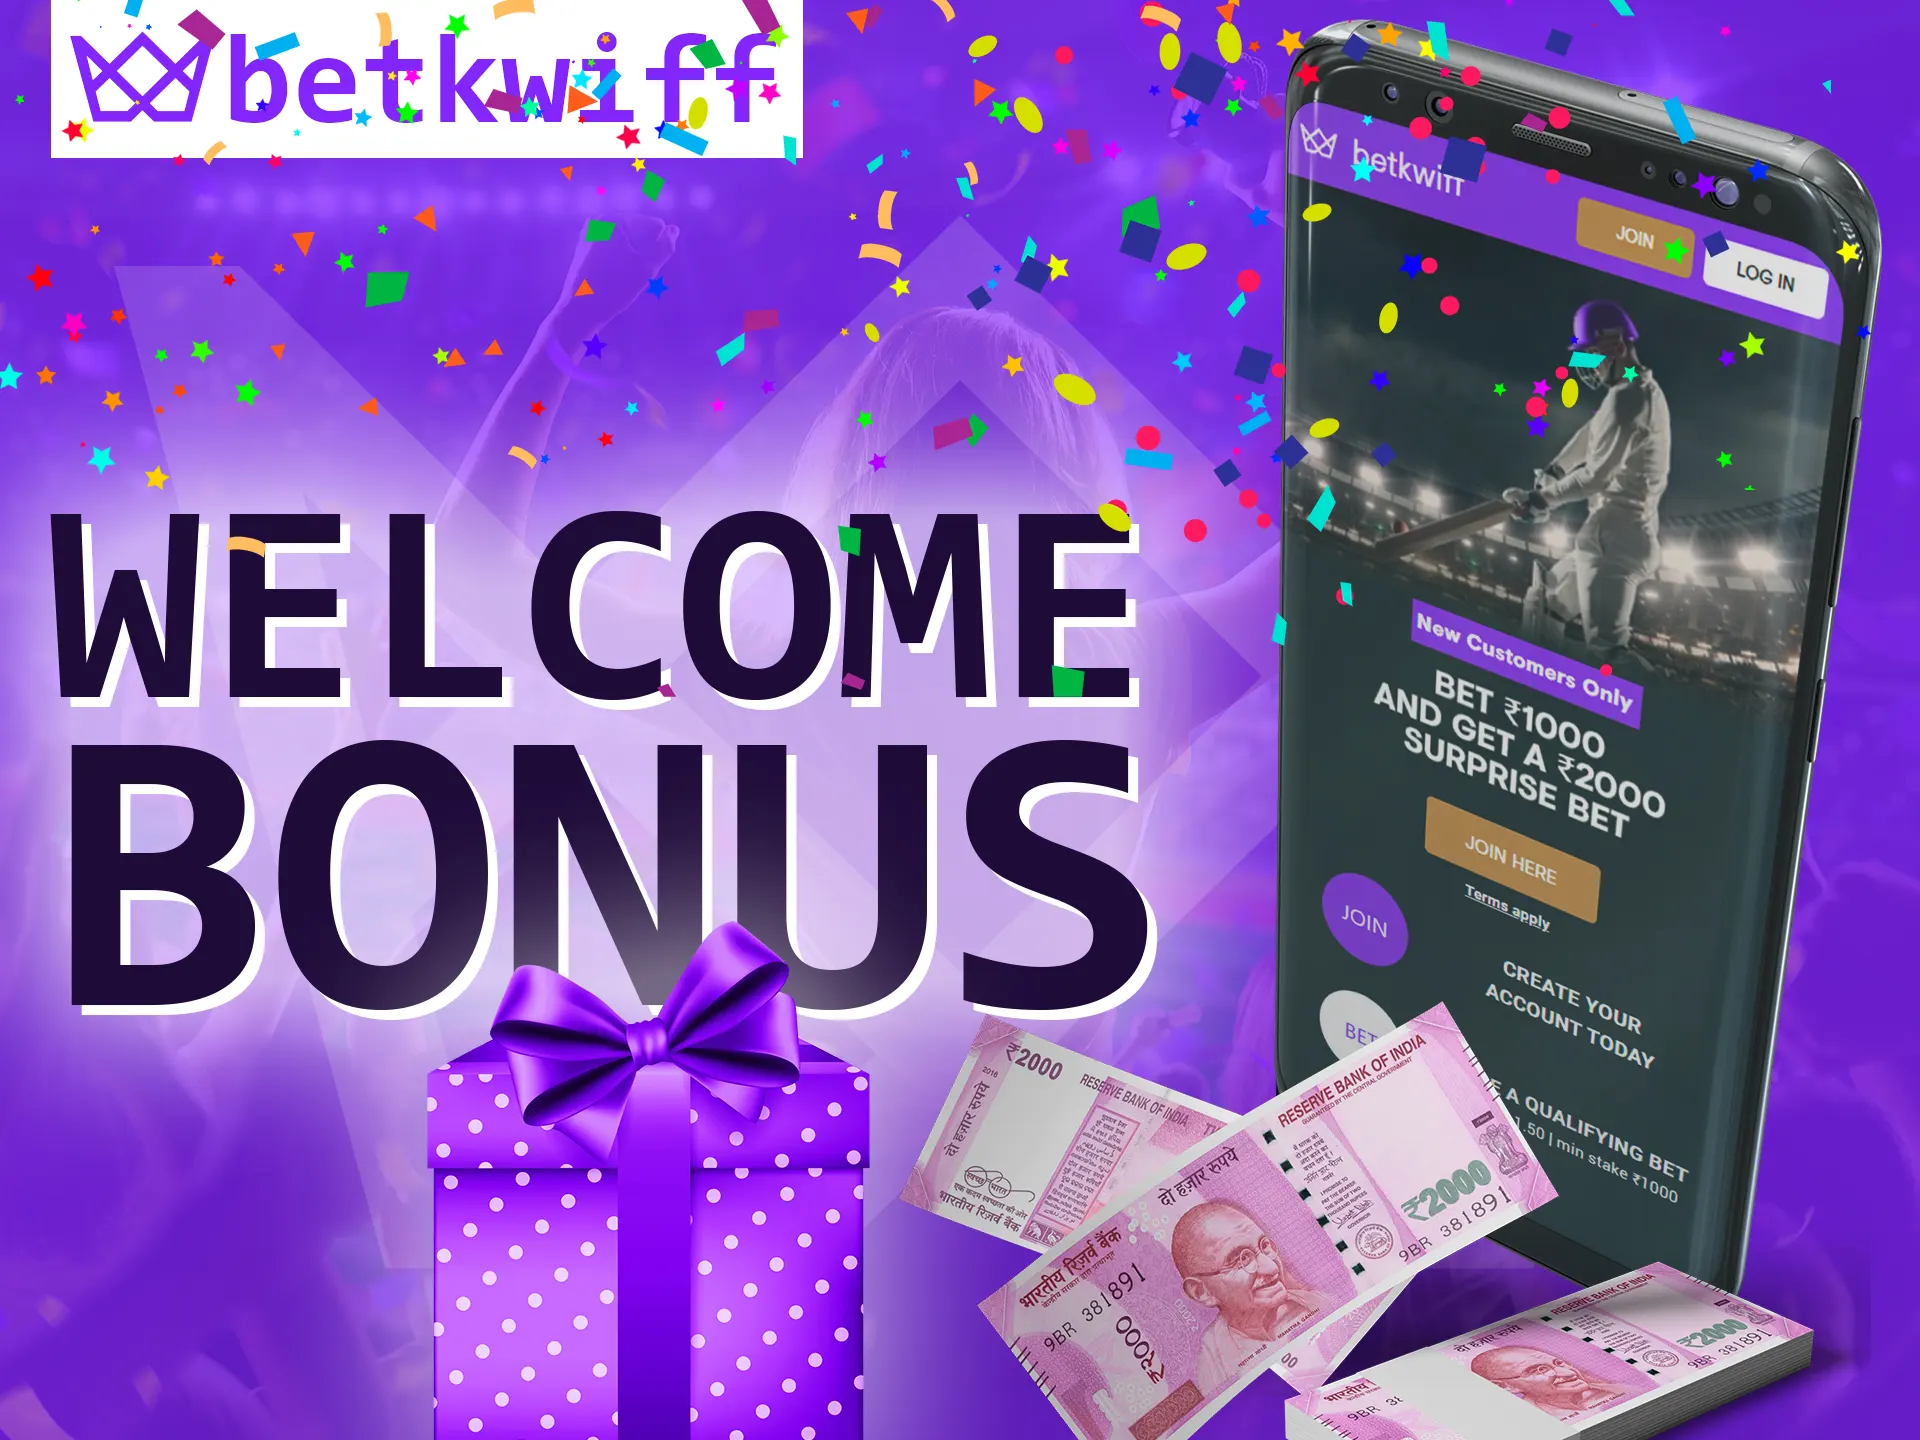 In the Betkwiff app, get a special welcome bonus.